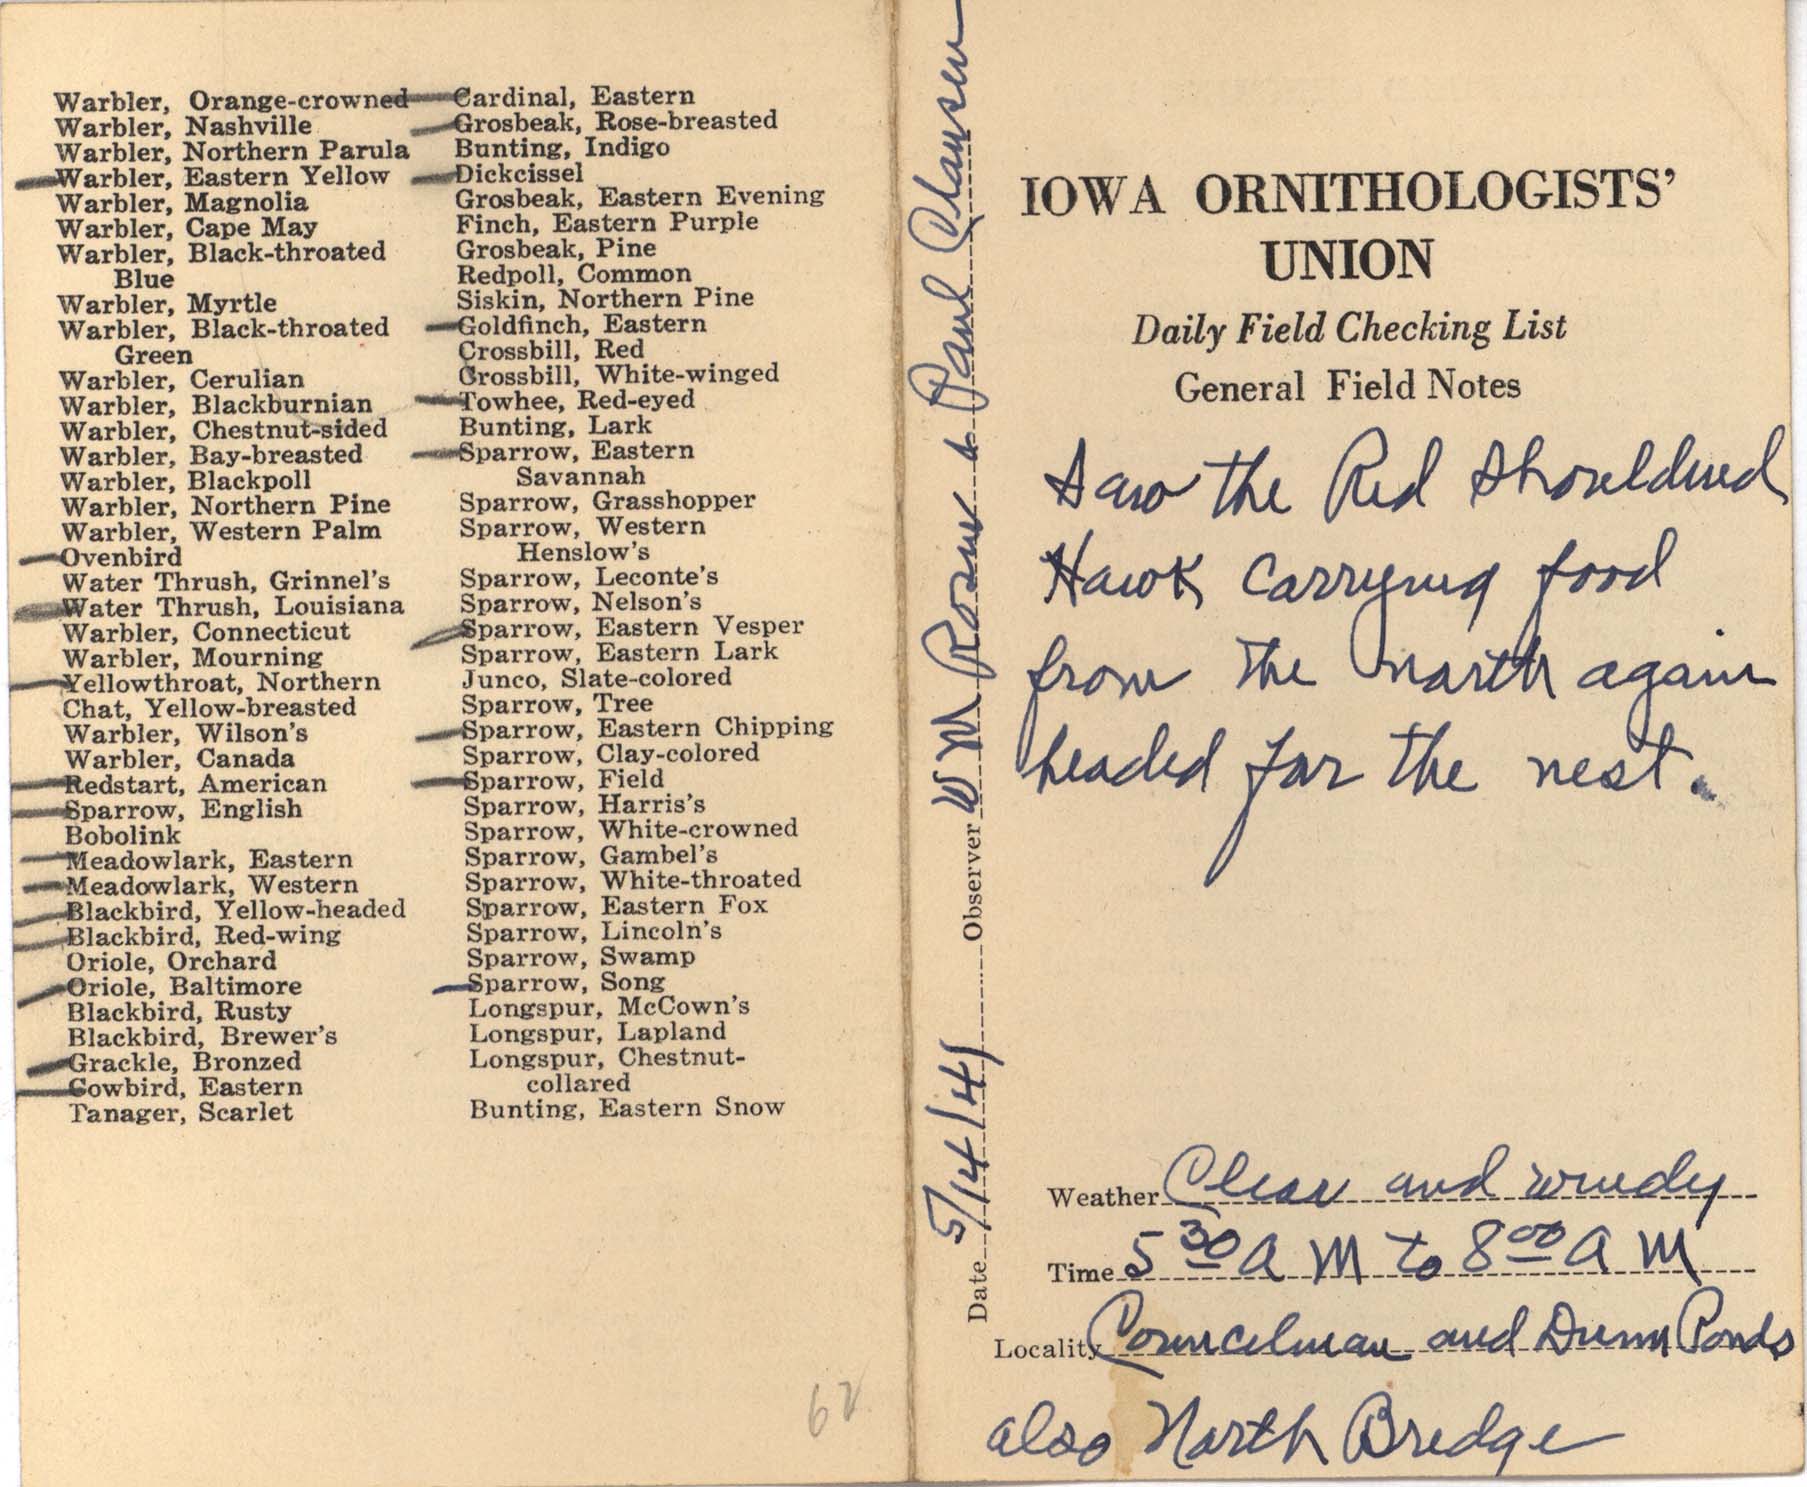 Daily field checking list by Walter Rosene, May 14, 1941